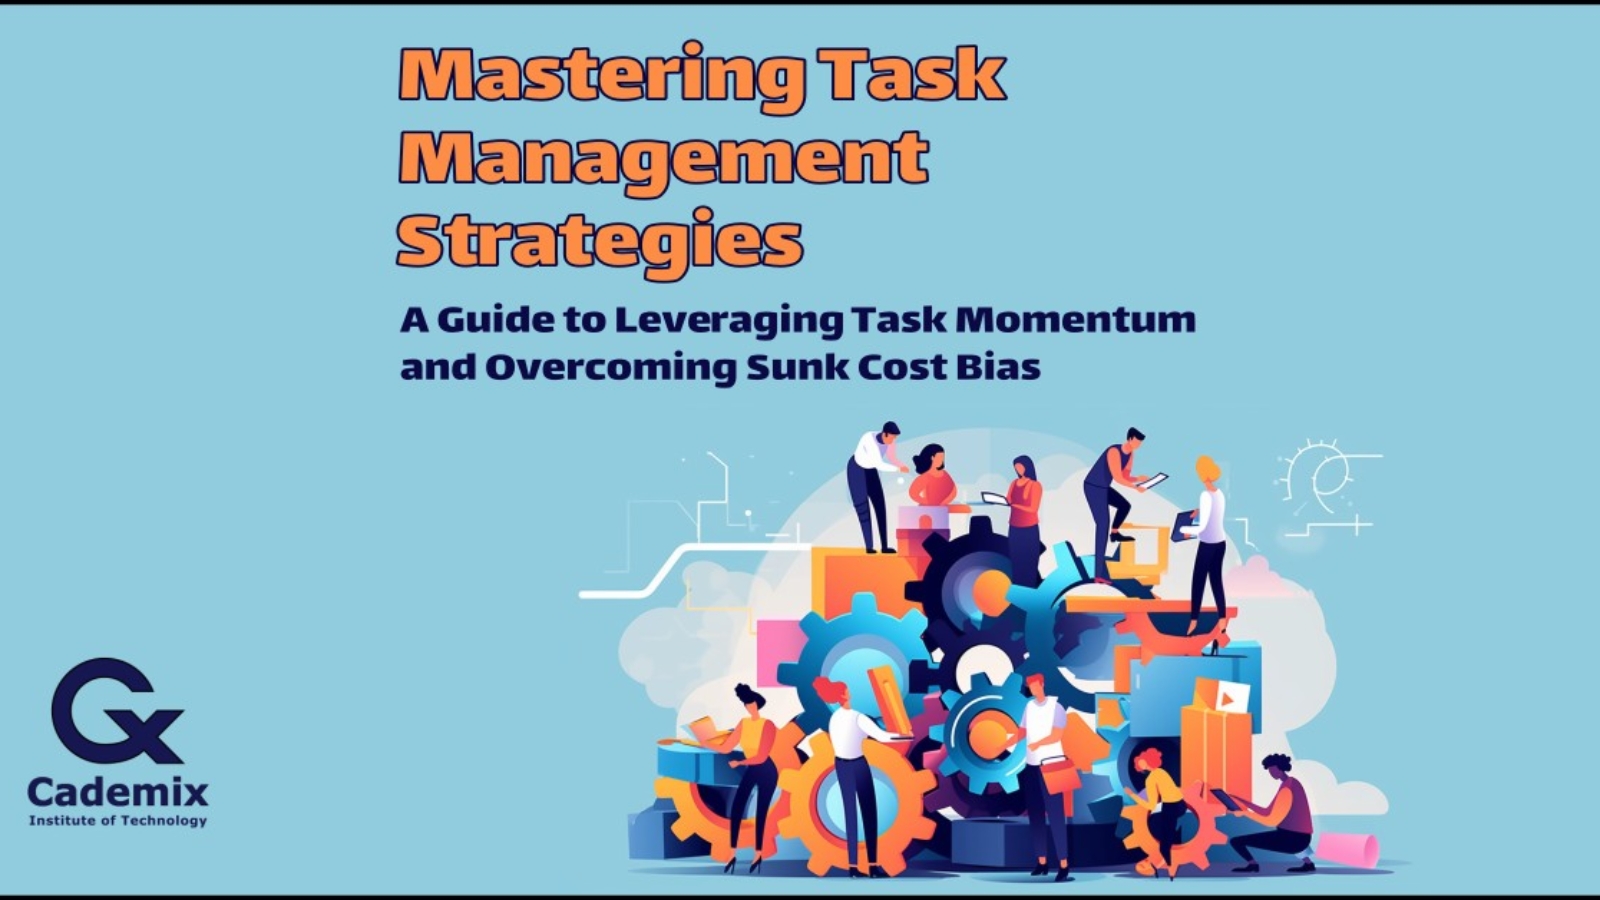 Mastering Task Management Strategies Cademix Magazine Article A Guide to Leveraging Task Momentum and Overcoming Sunk Cost Bias